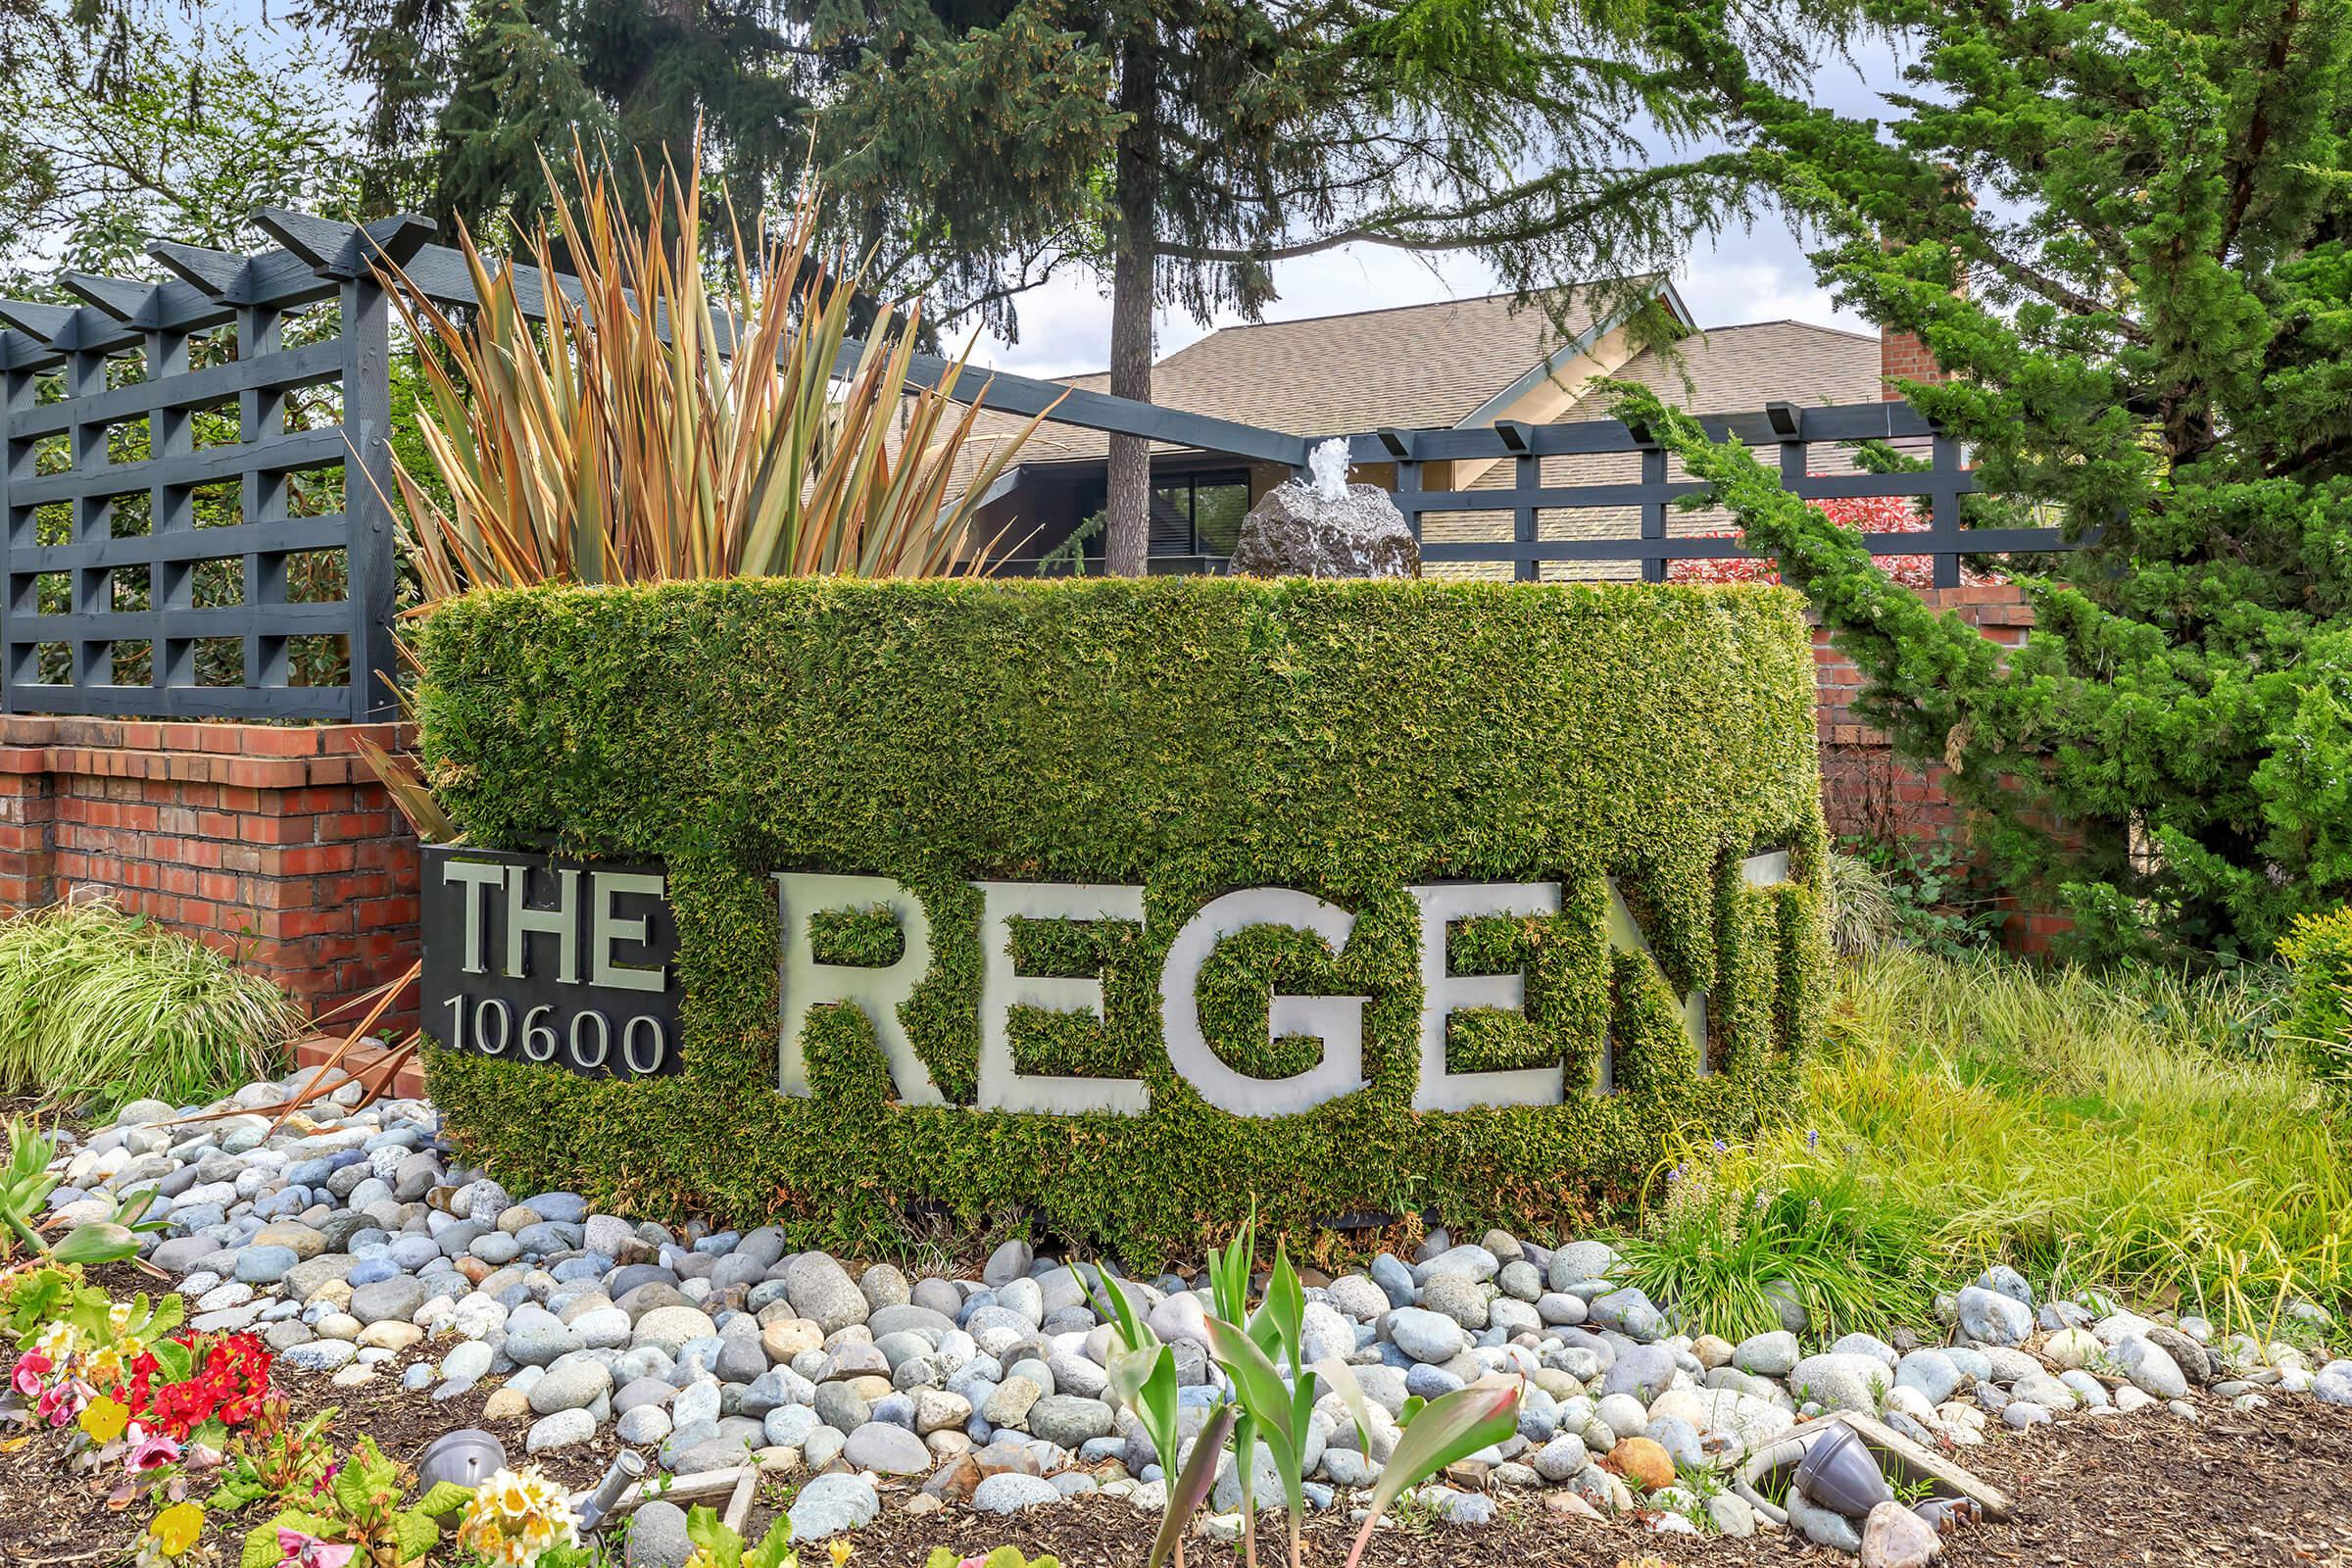 CONTACT US TODAY AT THE PET-FRIENDLY REGENT AT BELLEVUE WAY